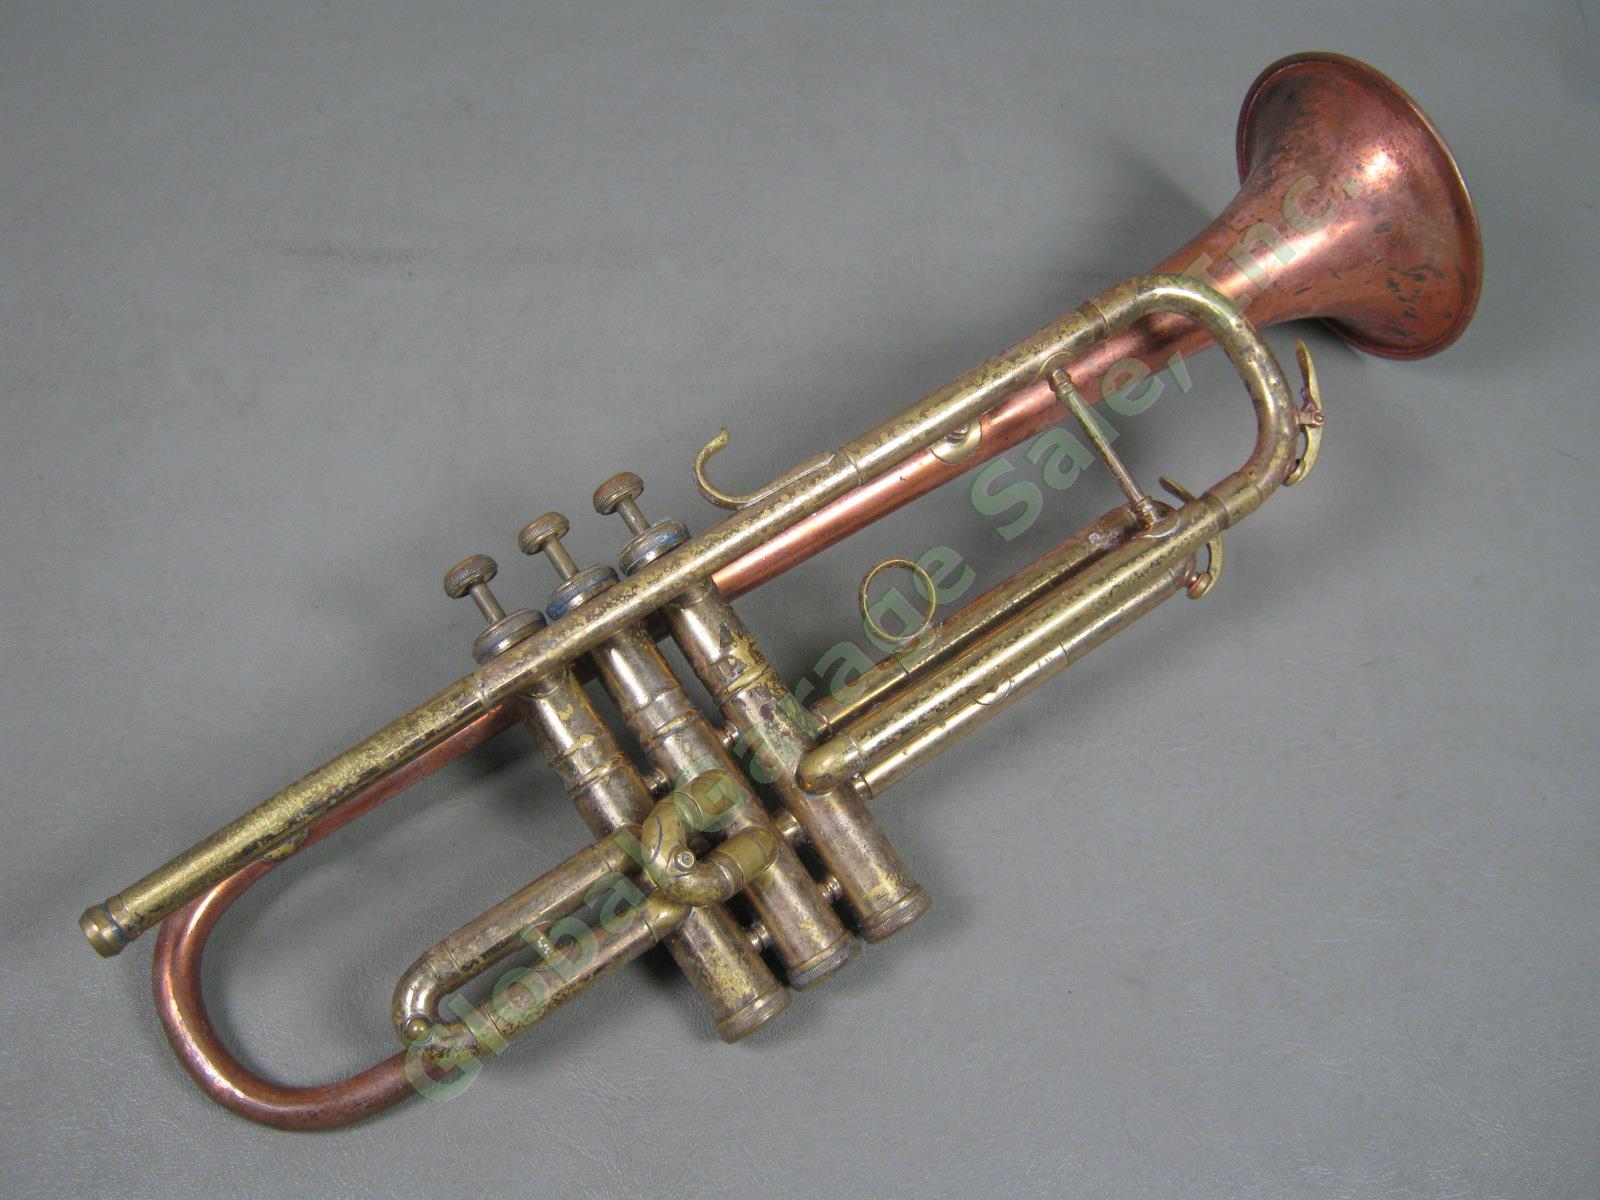 Vintage 1950s 1952 CG C G Conn Copper Bell Trumpet Serial Number 408748 No Res!